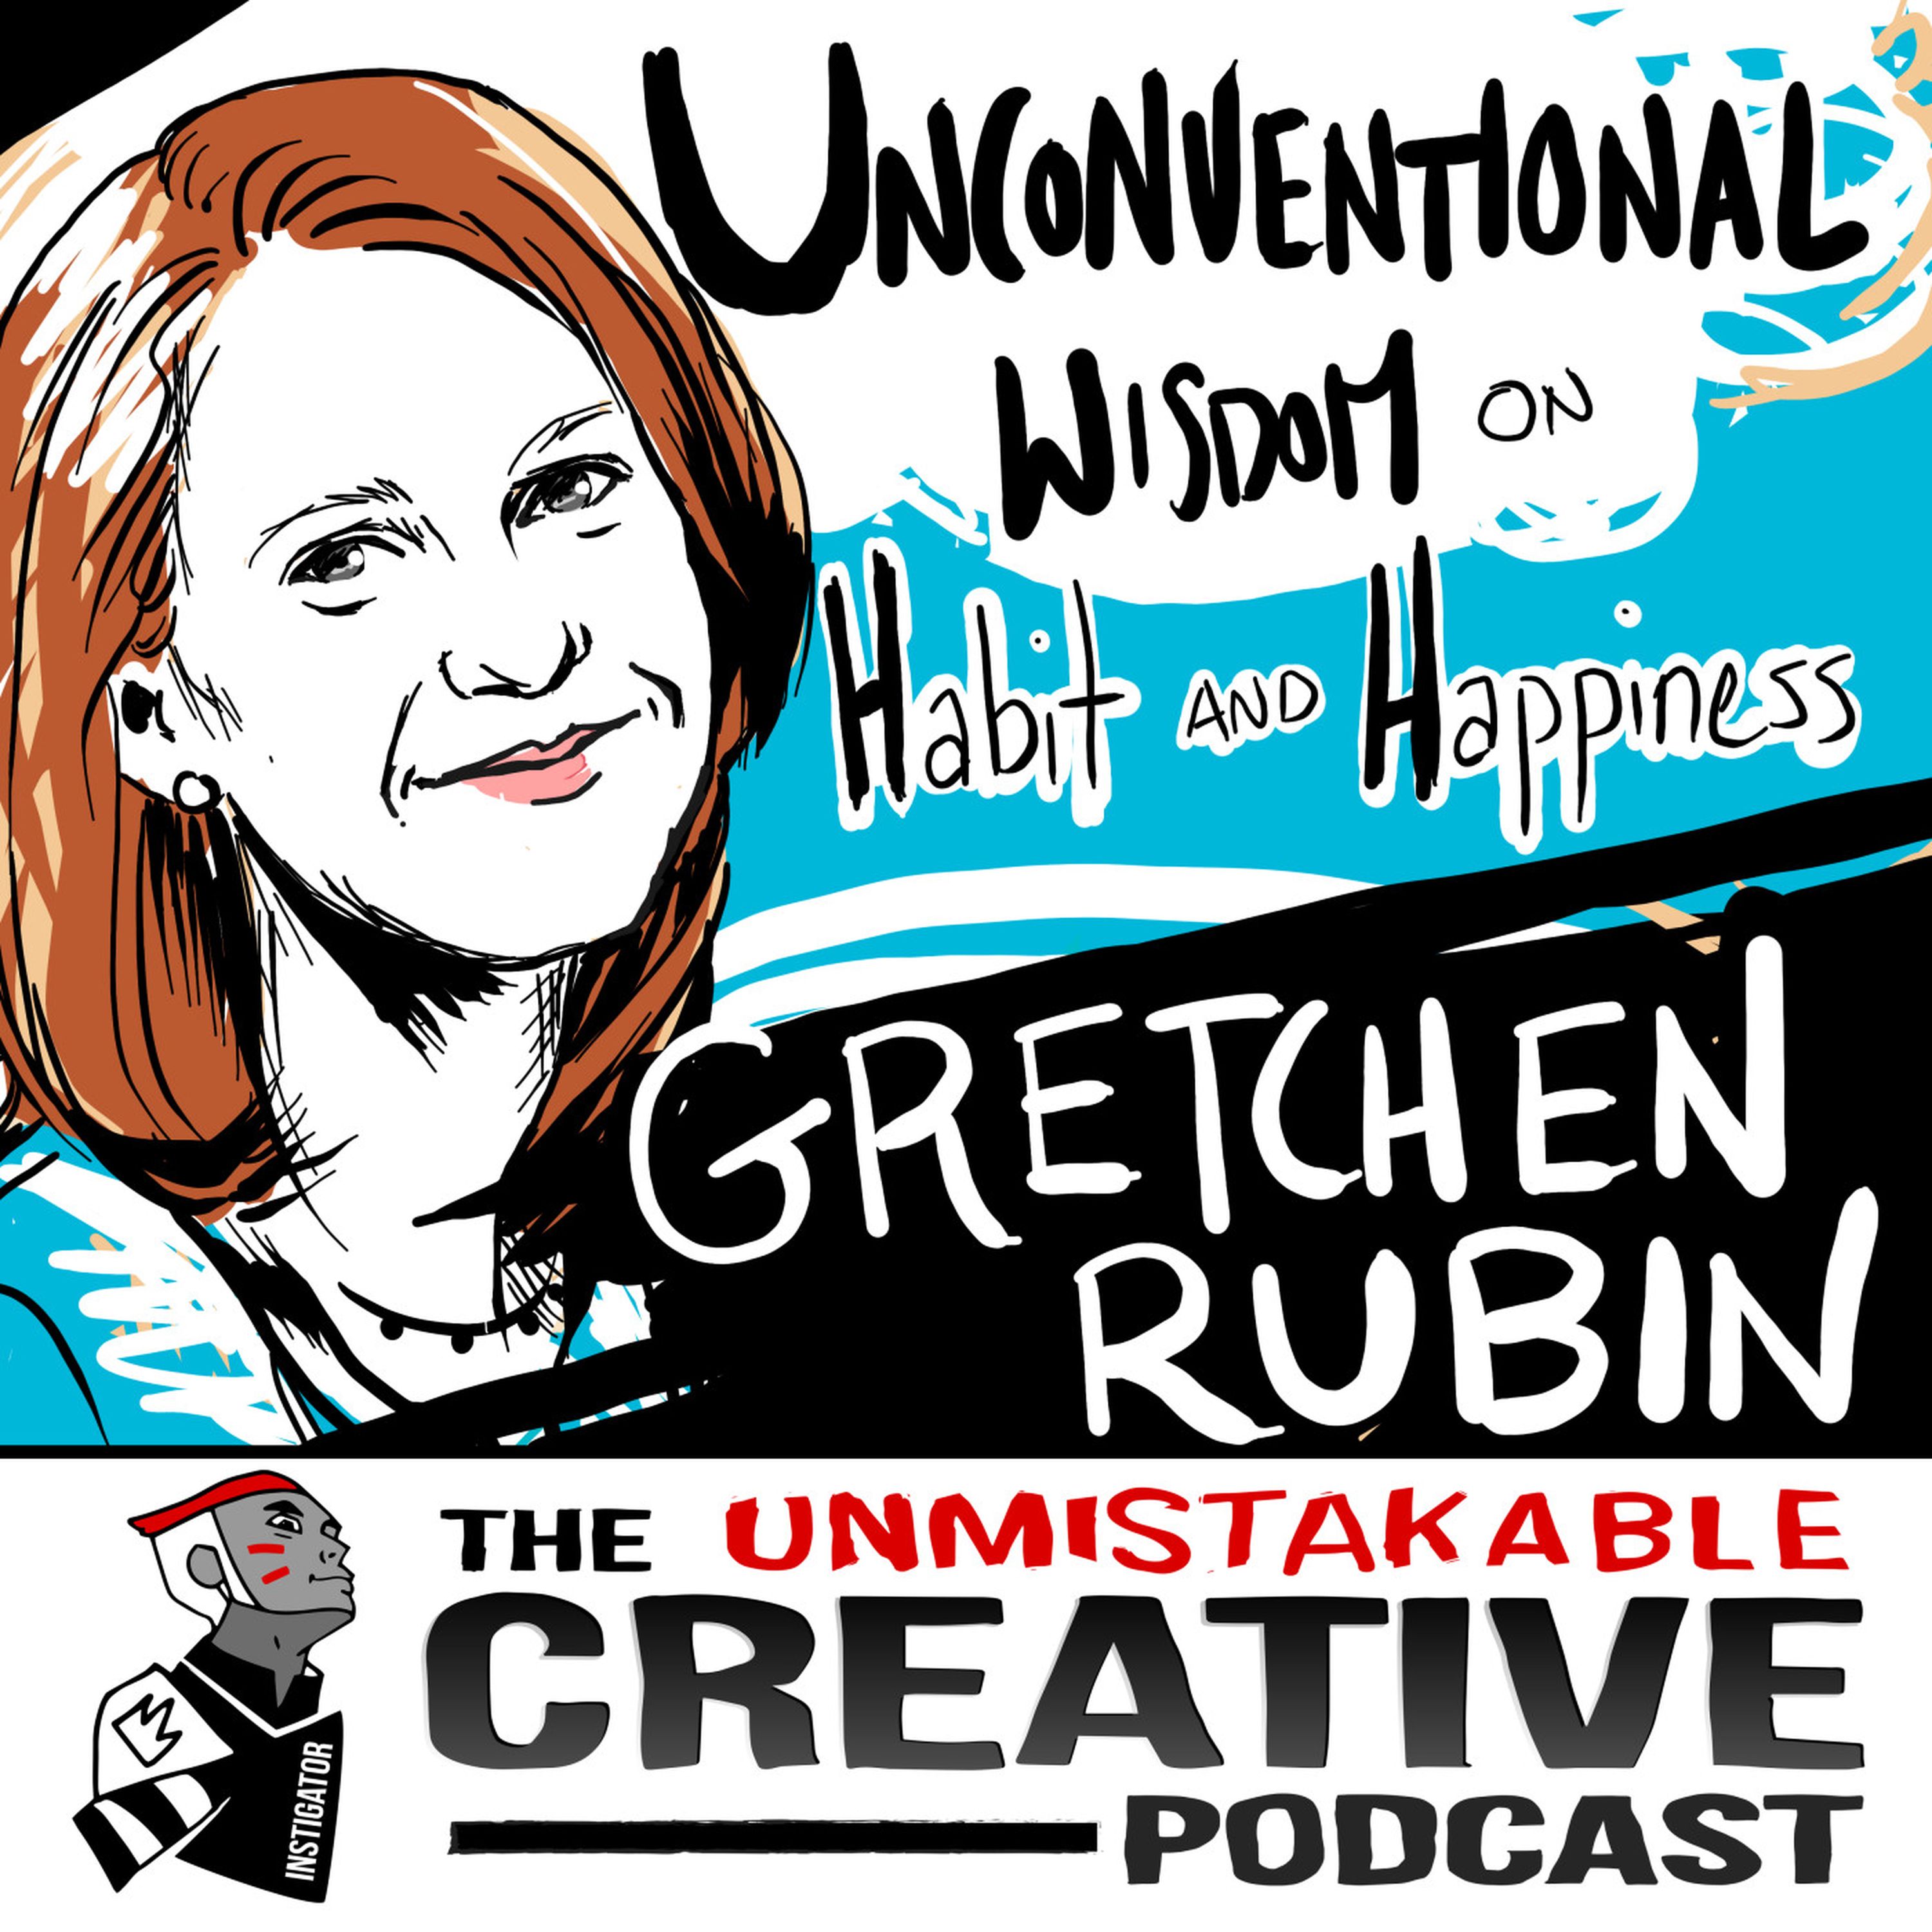 Unconventional Wisdom on Habits and Happiness with Gretchen Rubin